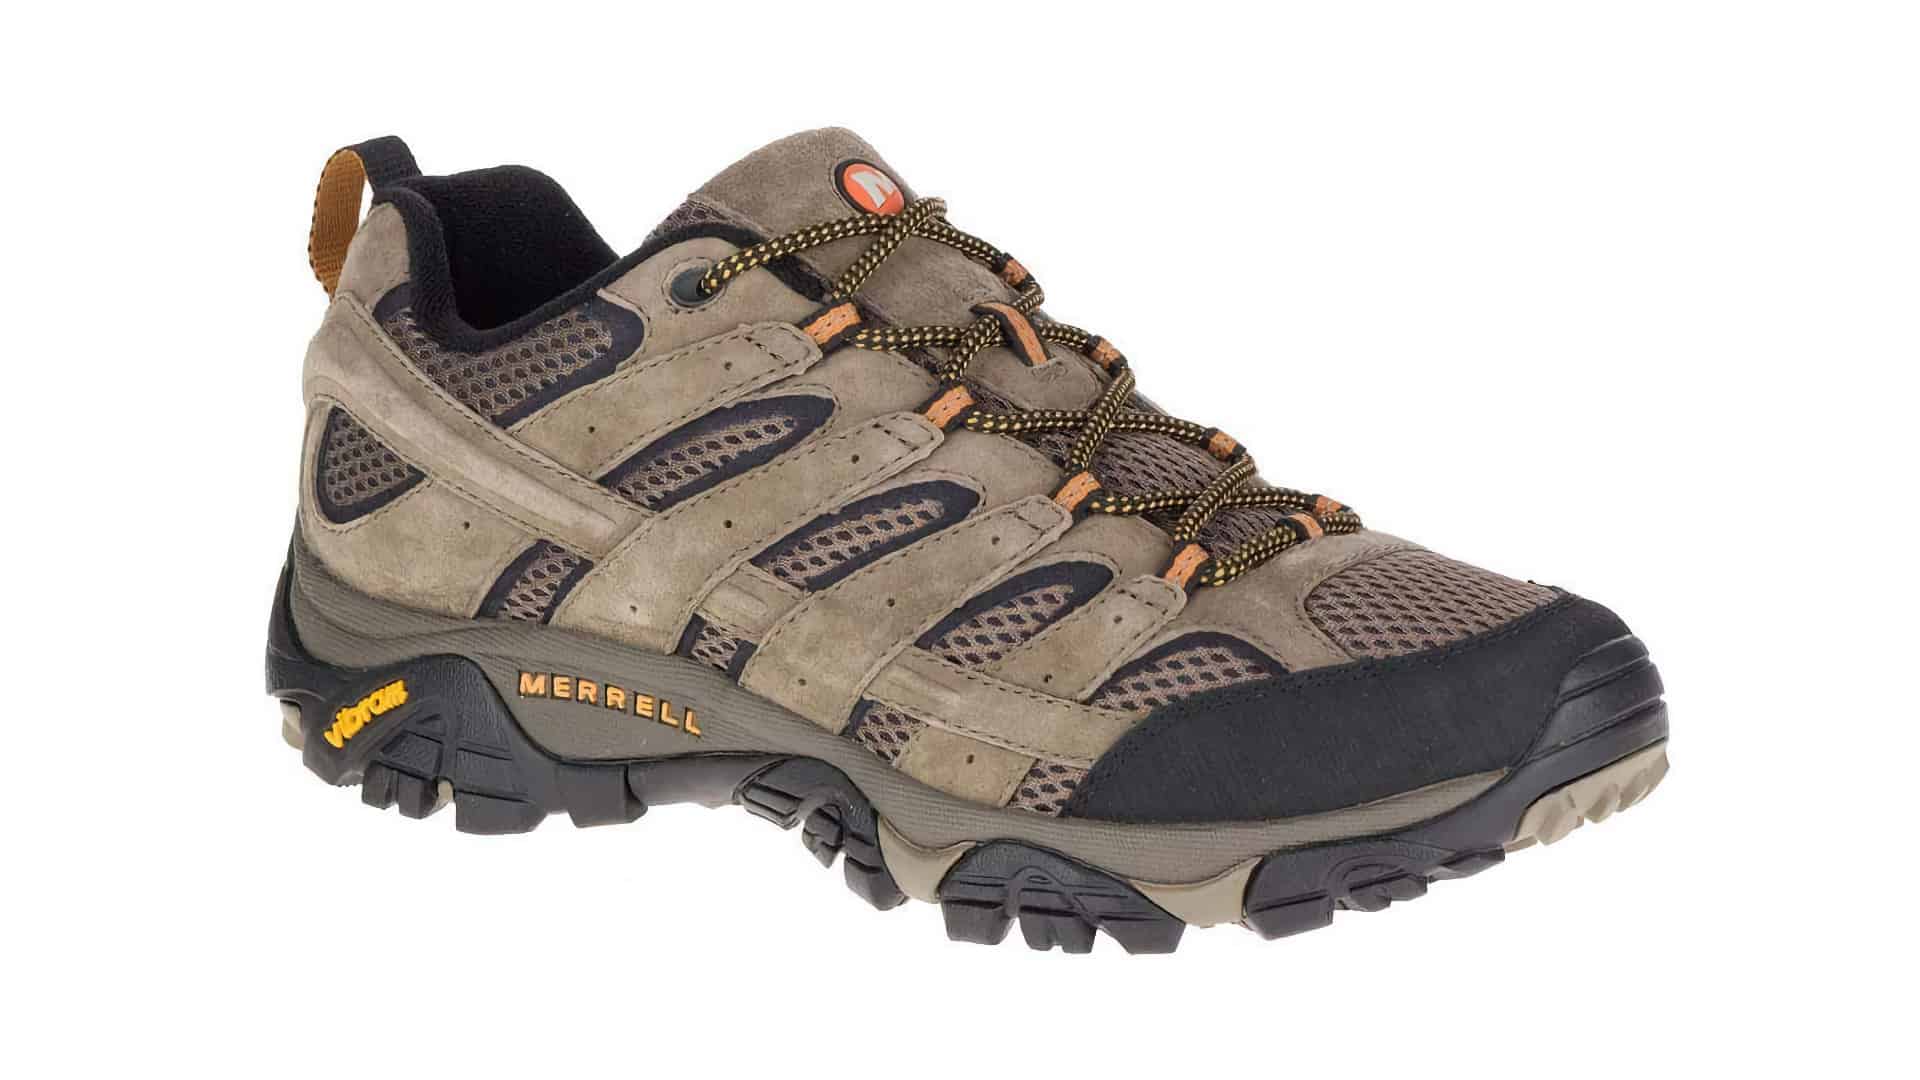 Hiking Boots or Shoes: Do I Really Need Hiking Boots? - HikingGuy.com